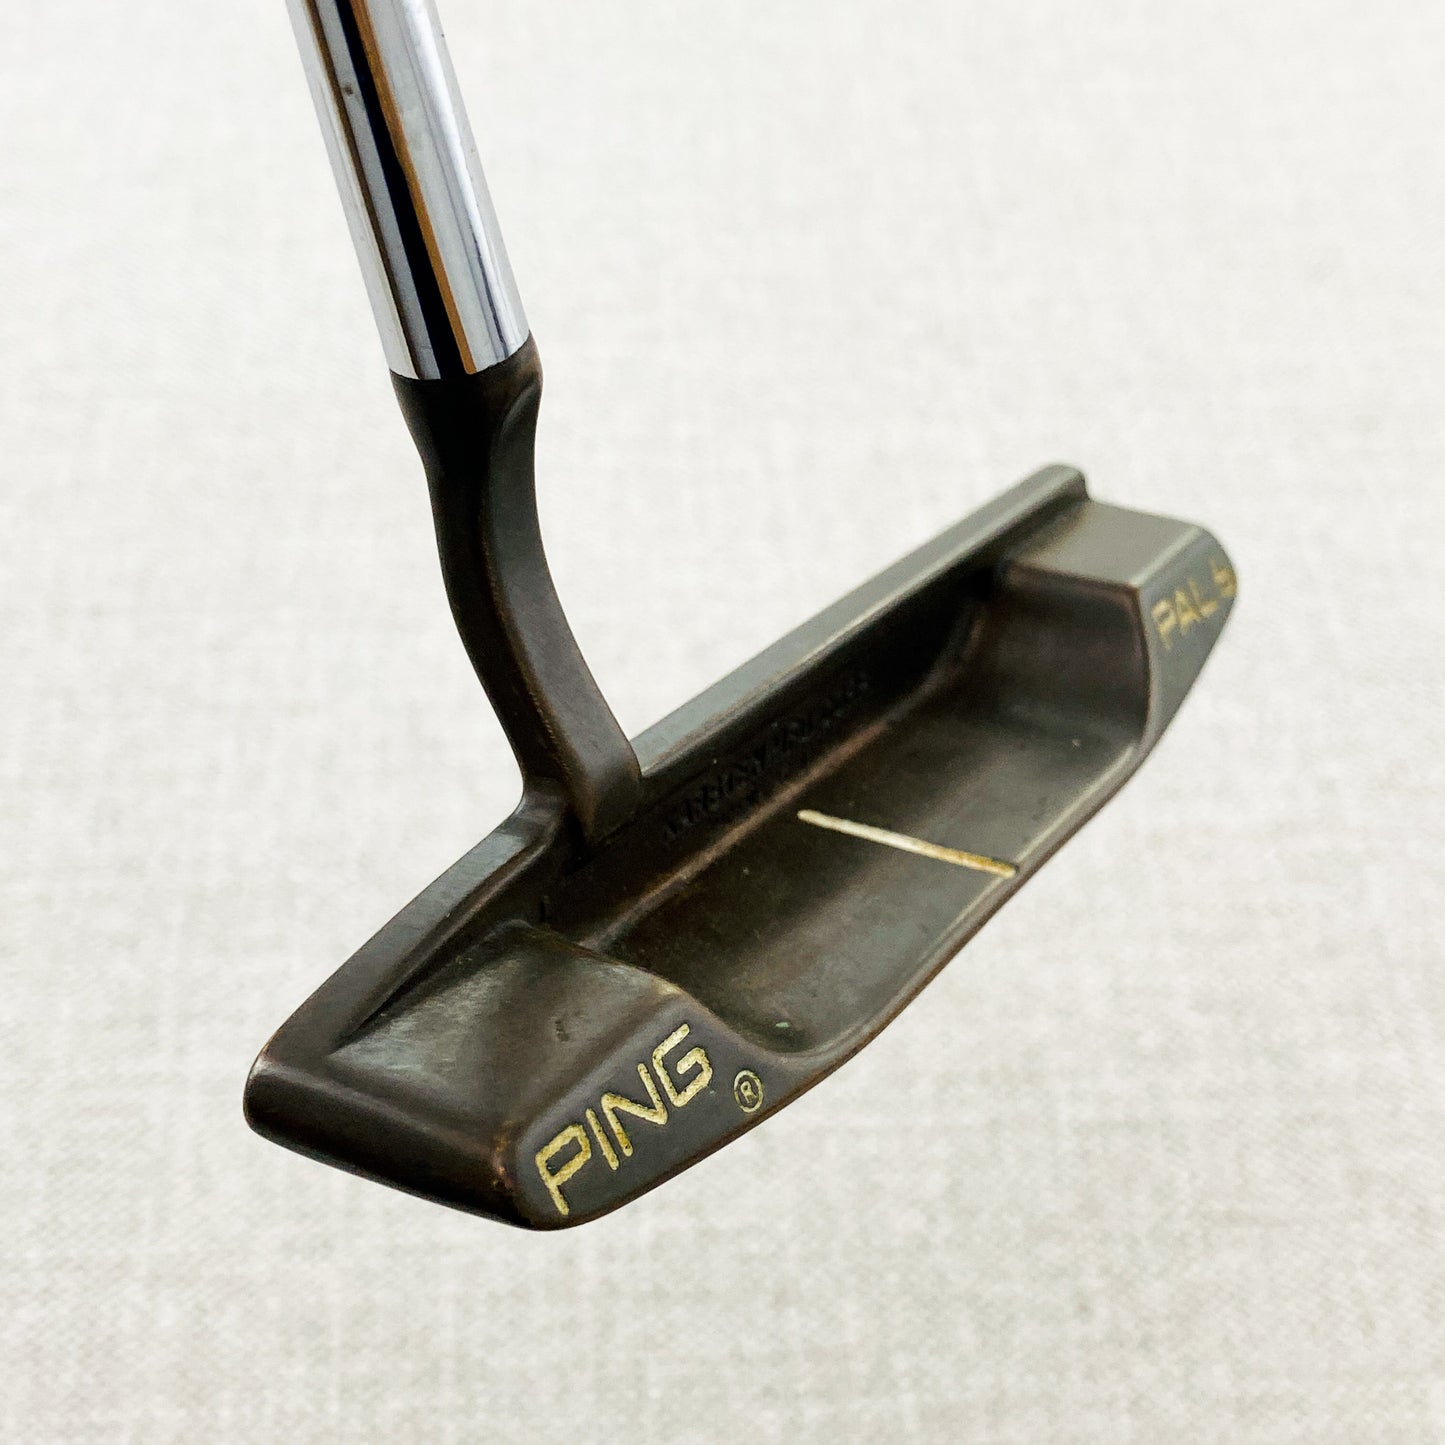 PING Pal 6 Beryllium Copper Putter. 35 inch - Very Good Condition # 11058